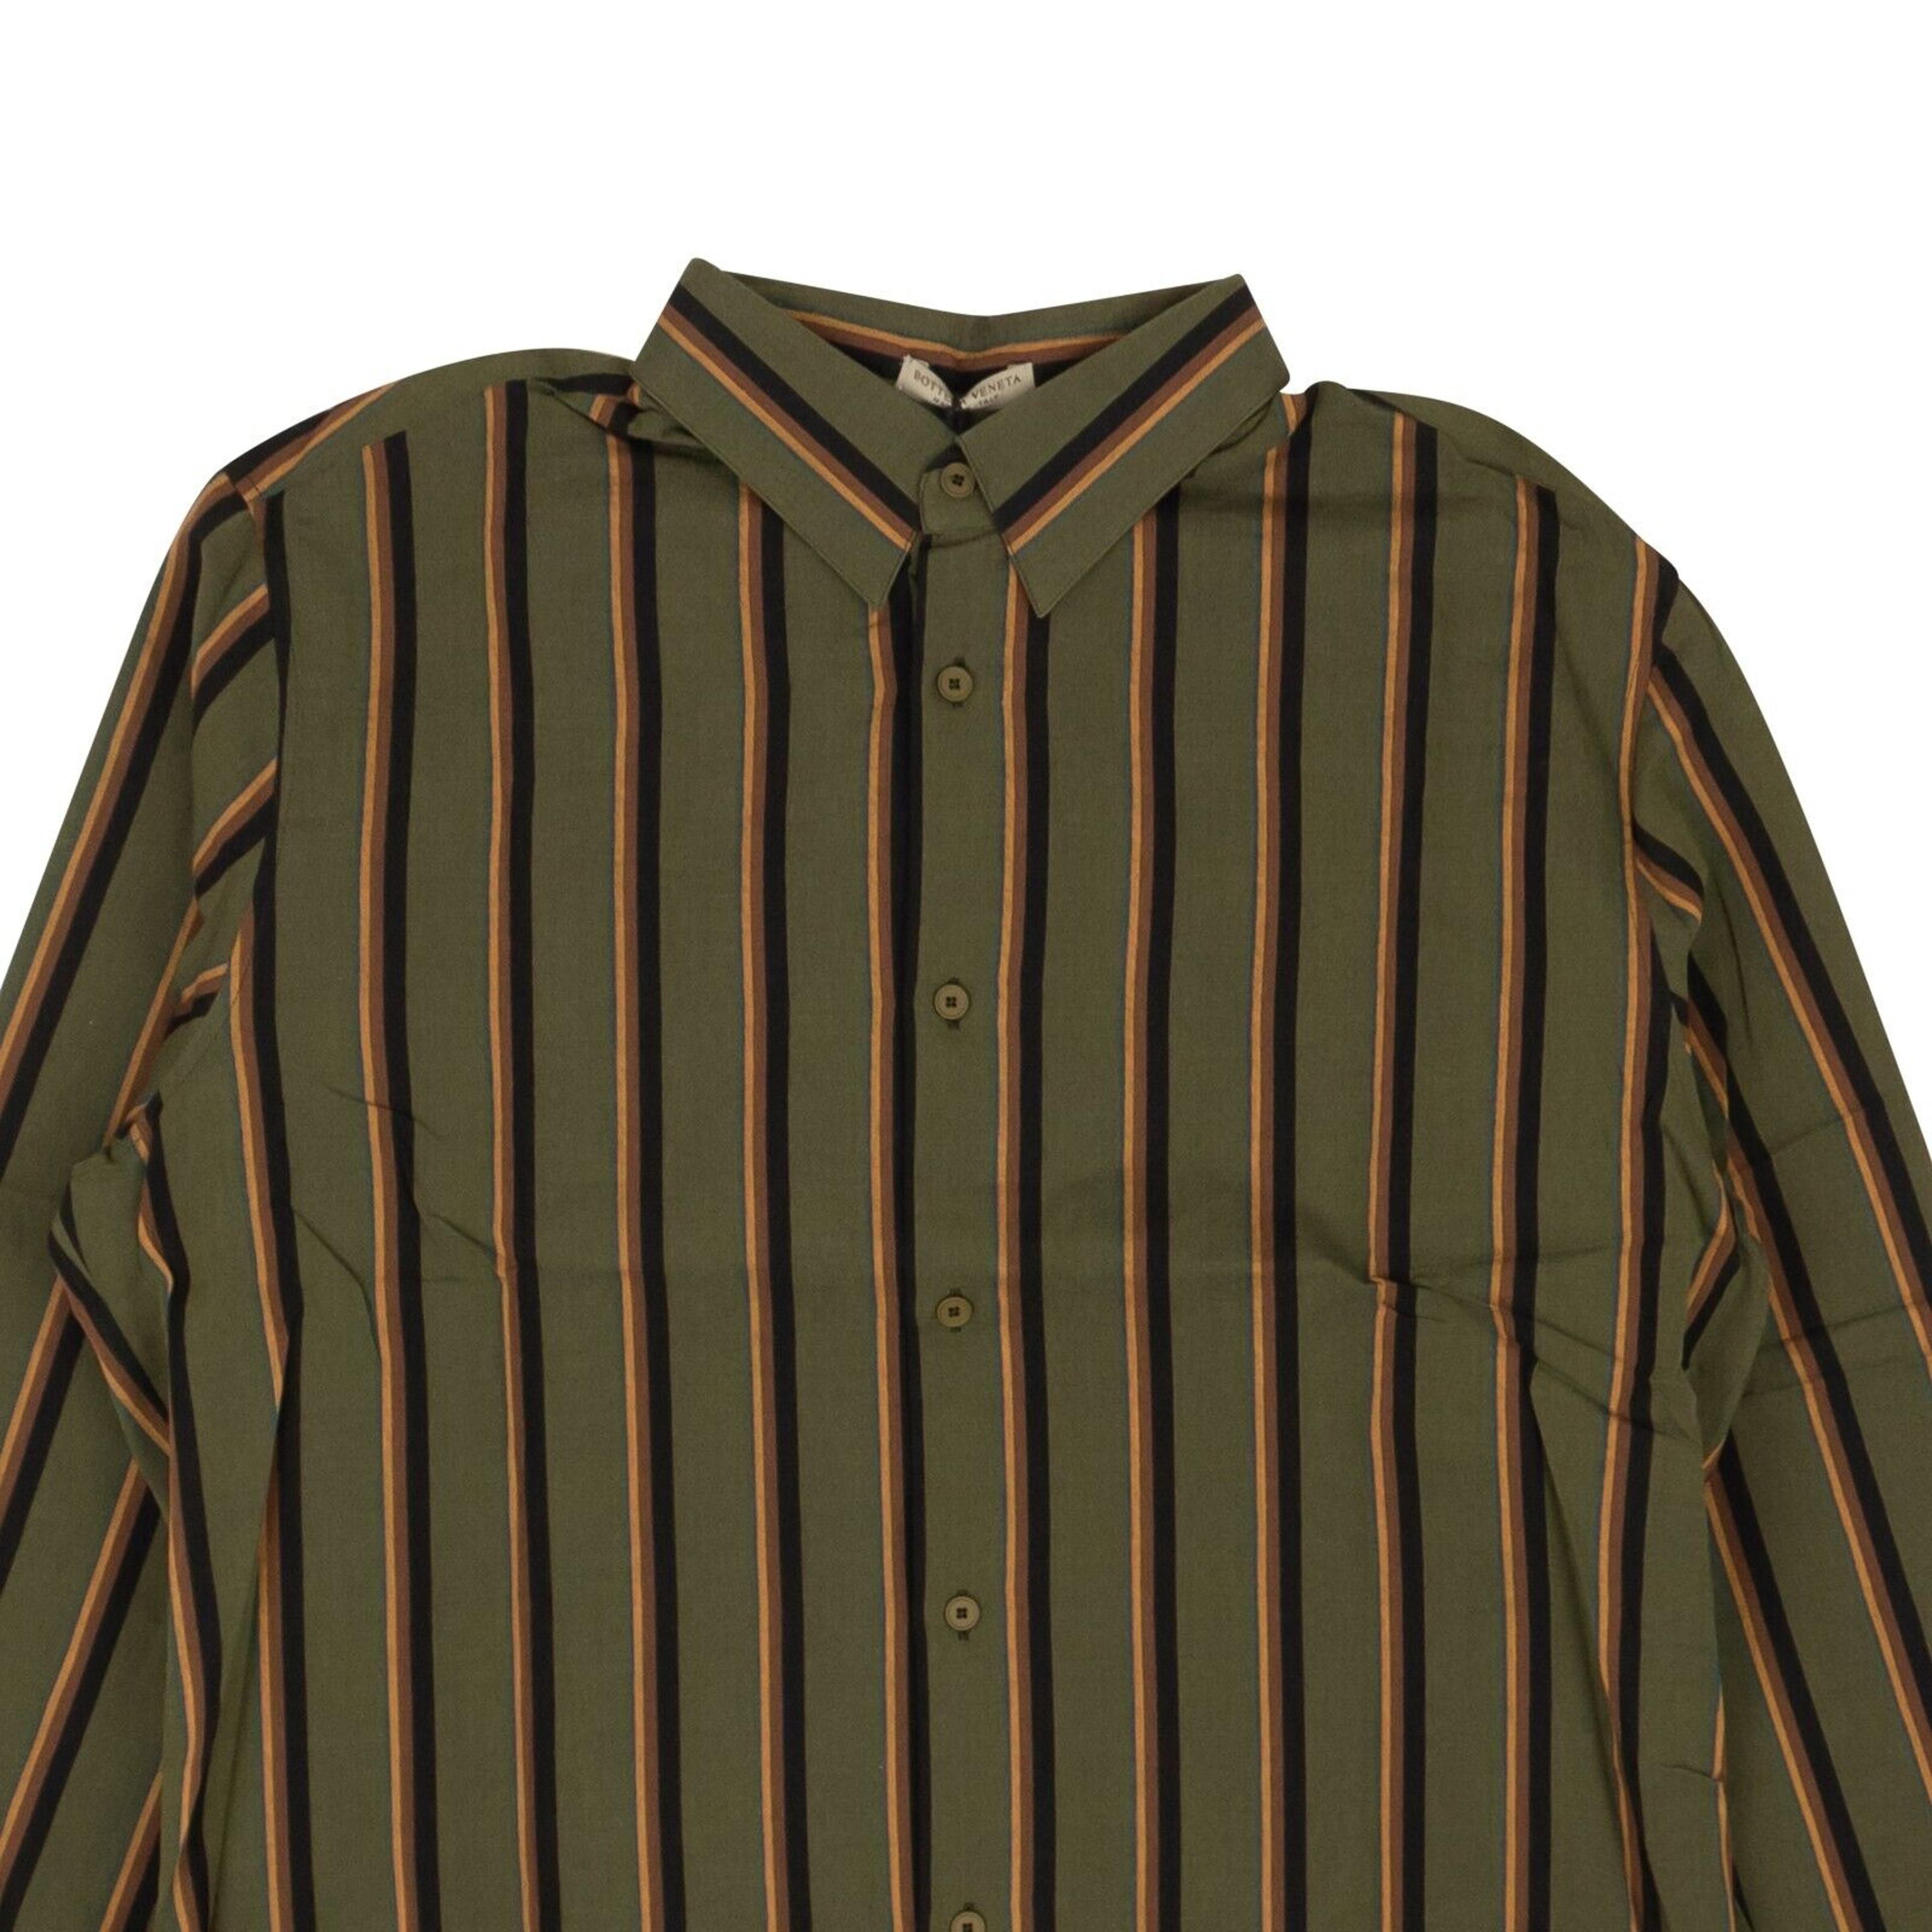 Alternate View 1 of Olive Green Striped Button Down Blouse